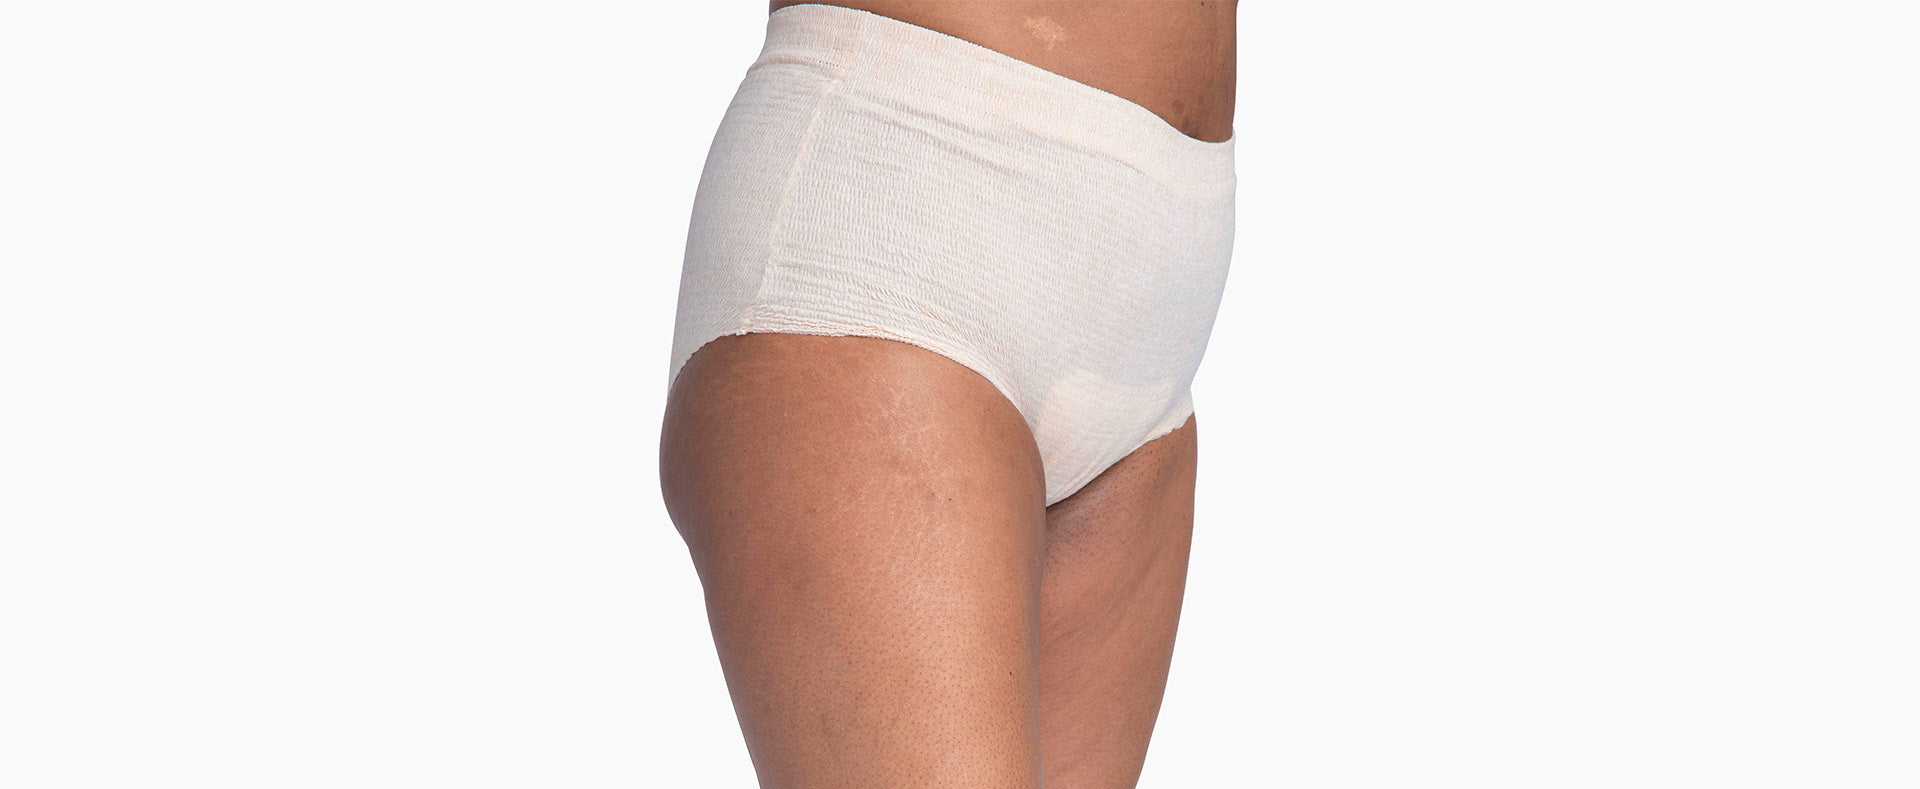 The Most Comfortable Incontinence Underwear of 2023